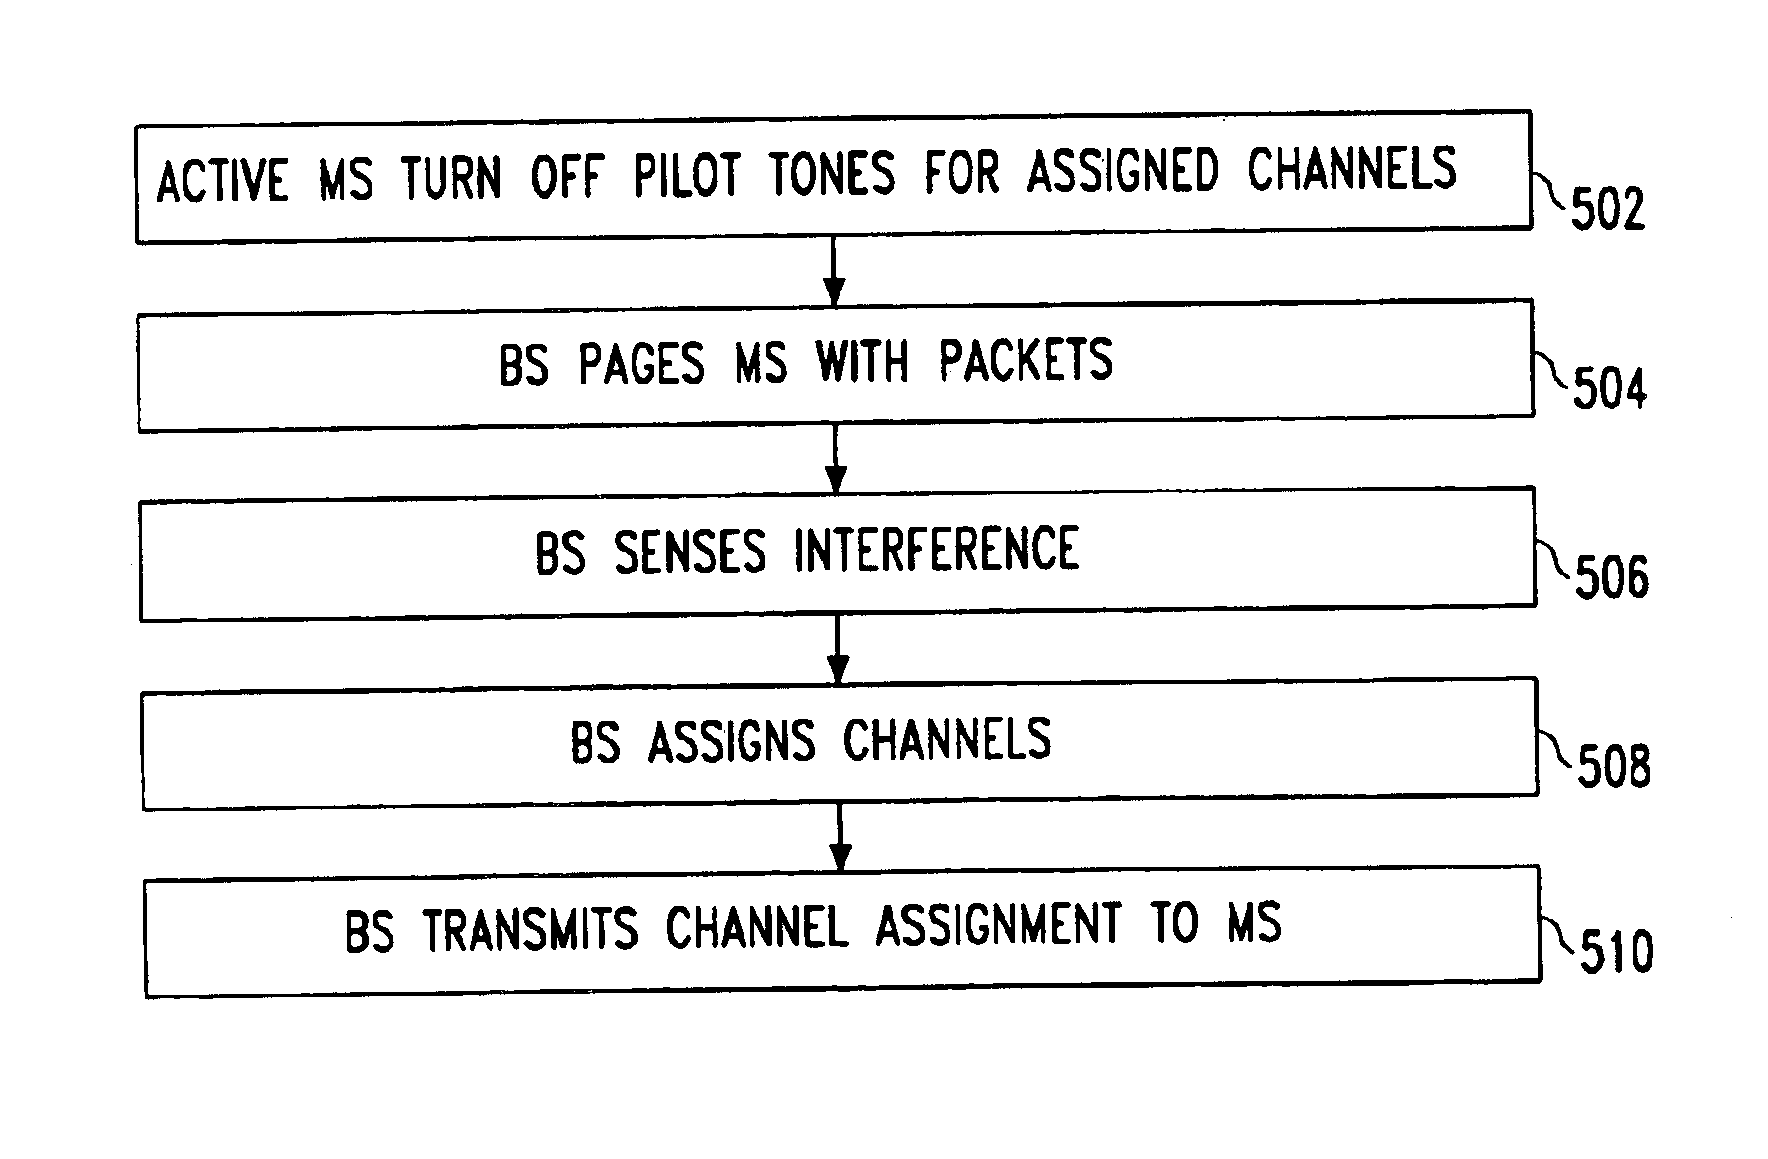 Asymmetric measurement-based dynamic packet assignment system and method for wireless data services